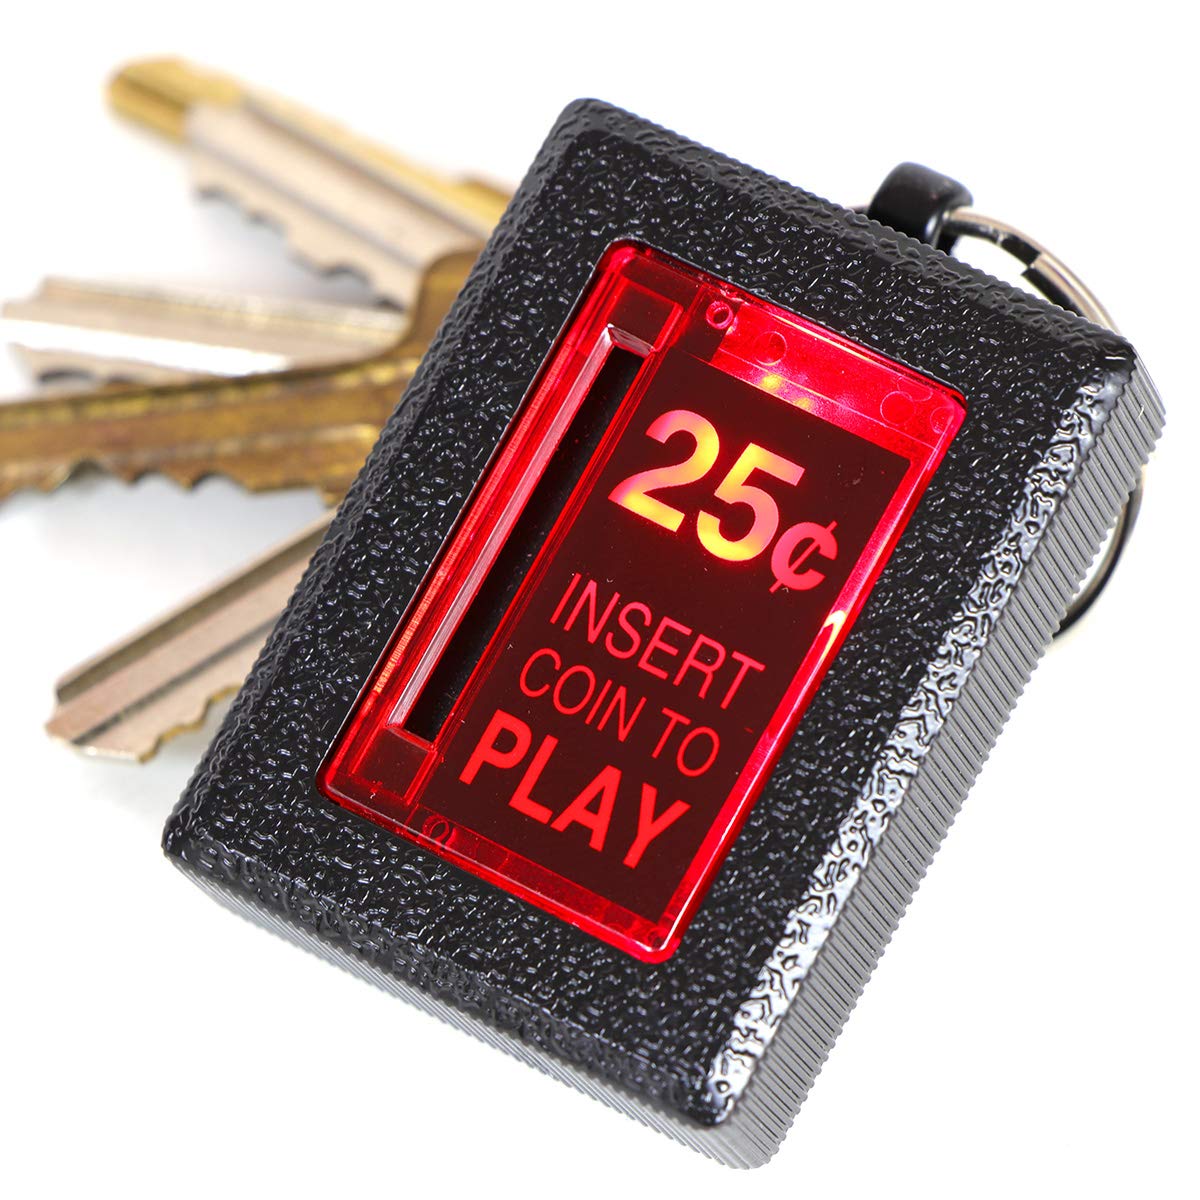 An Insert Coin Arcade Key-Chain That Actually Lights Up